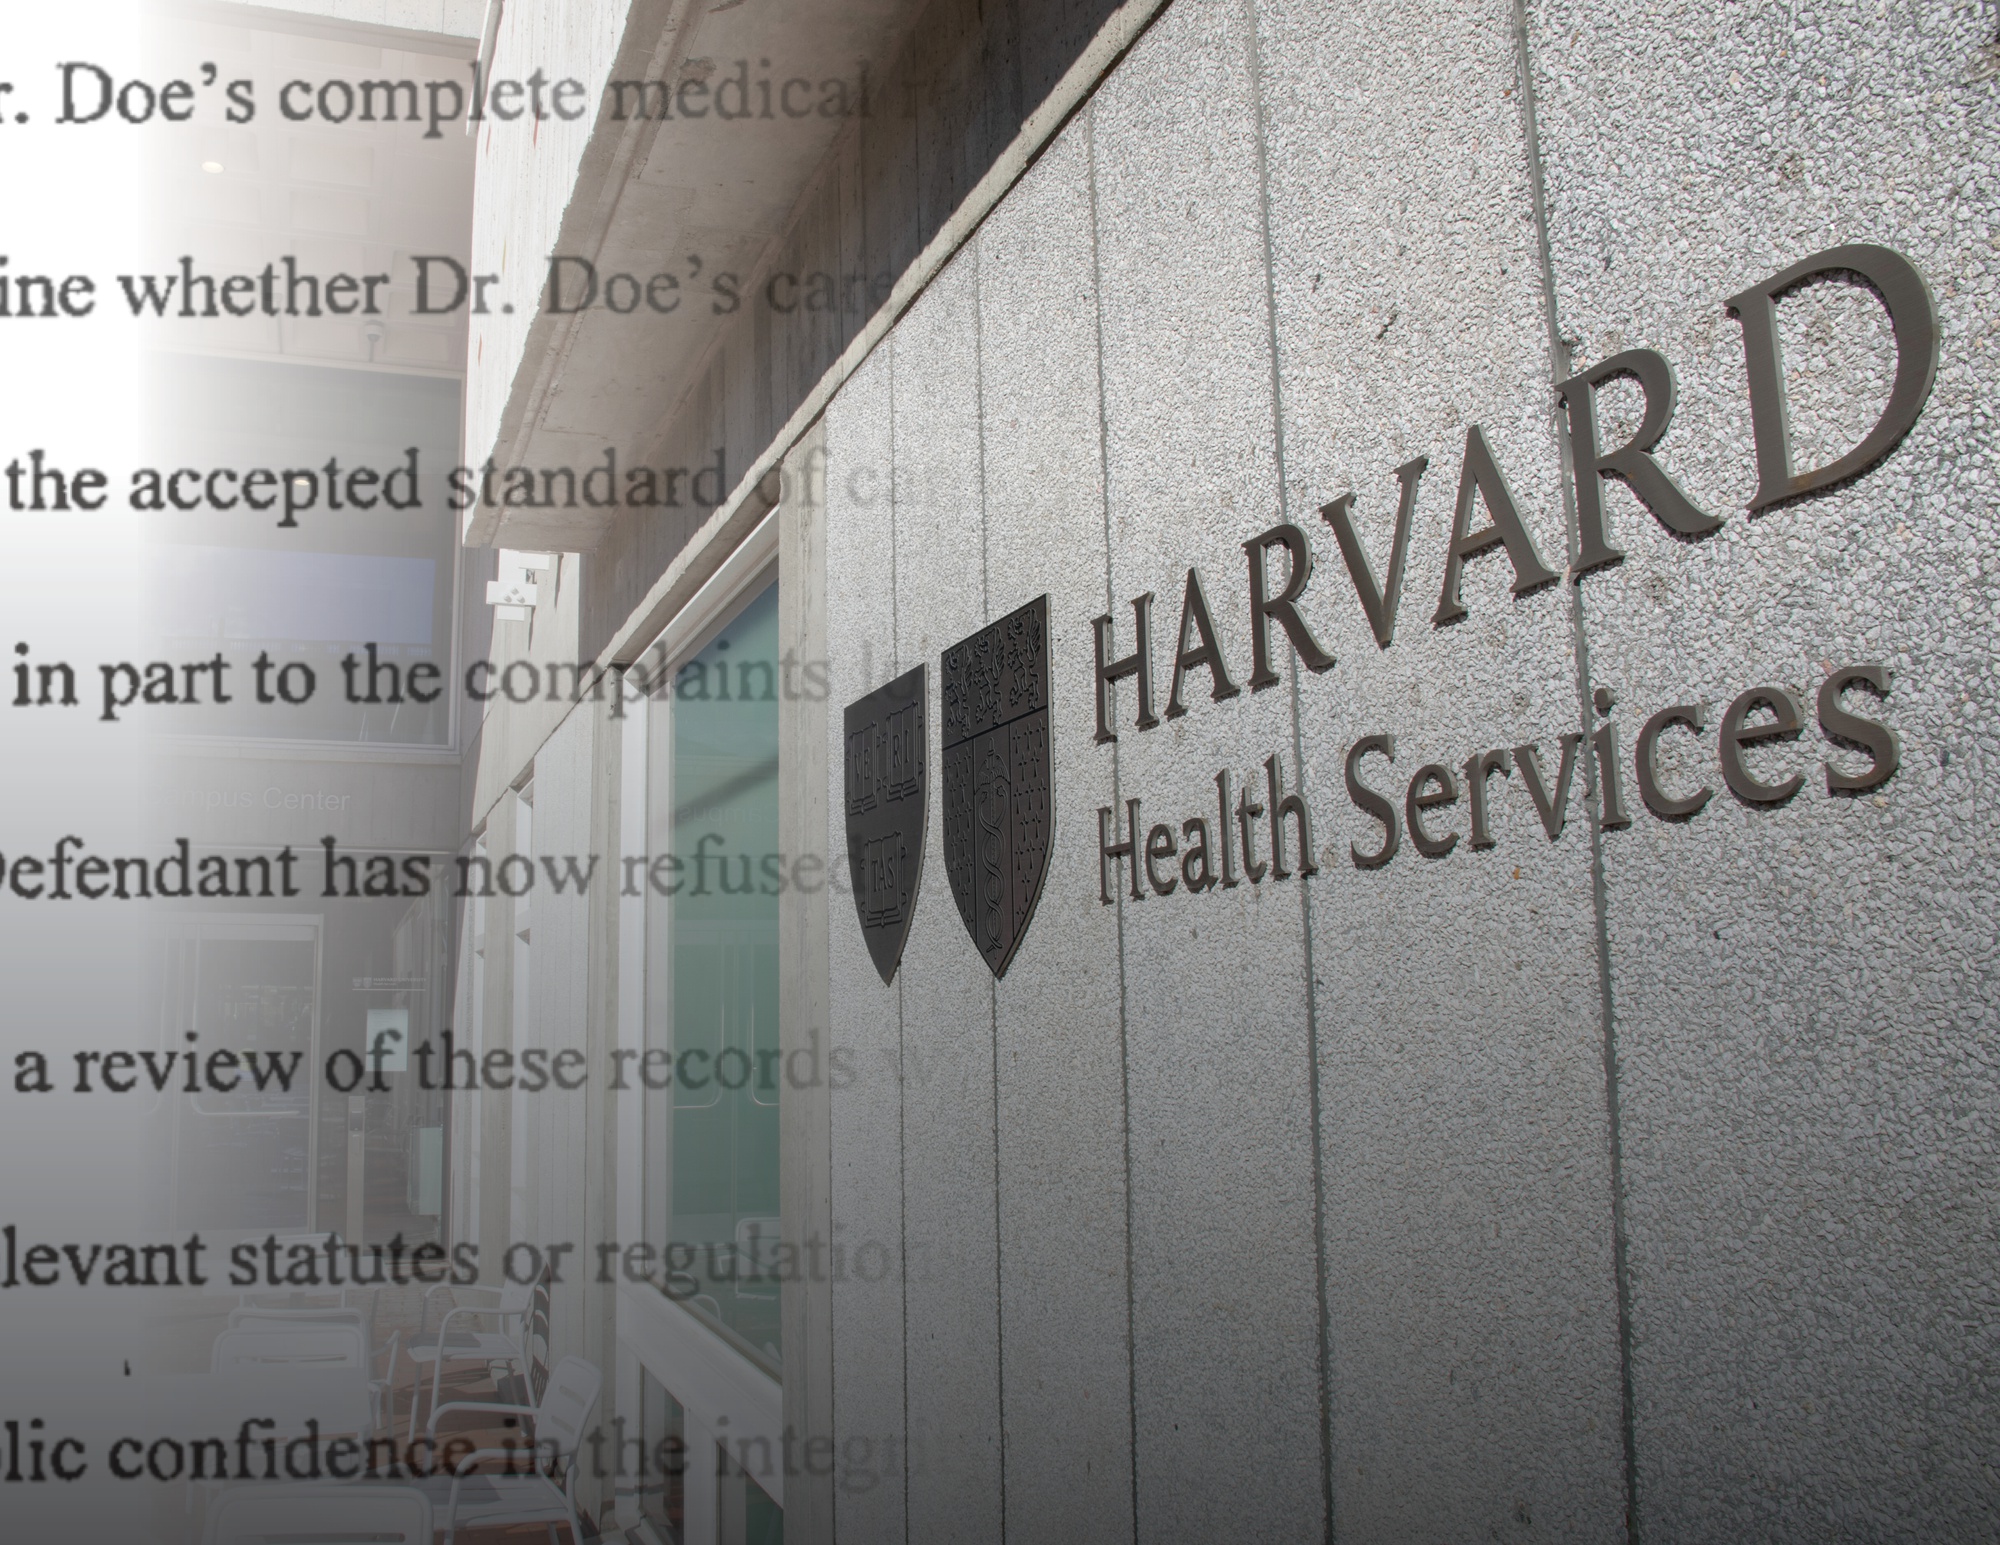 Harvard University Health Services terminated a physician last year after several female patients alleged misconduct and inappropriate behavior.